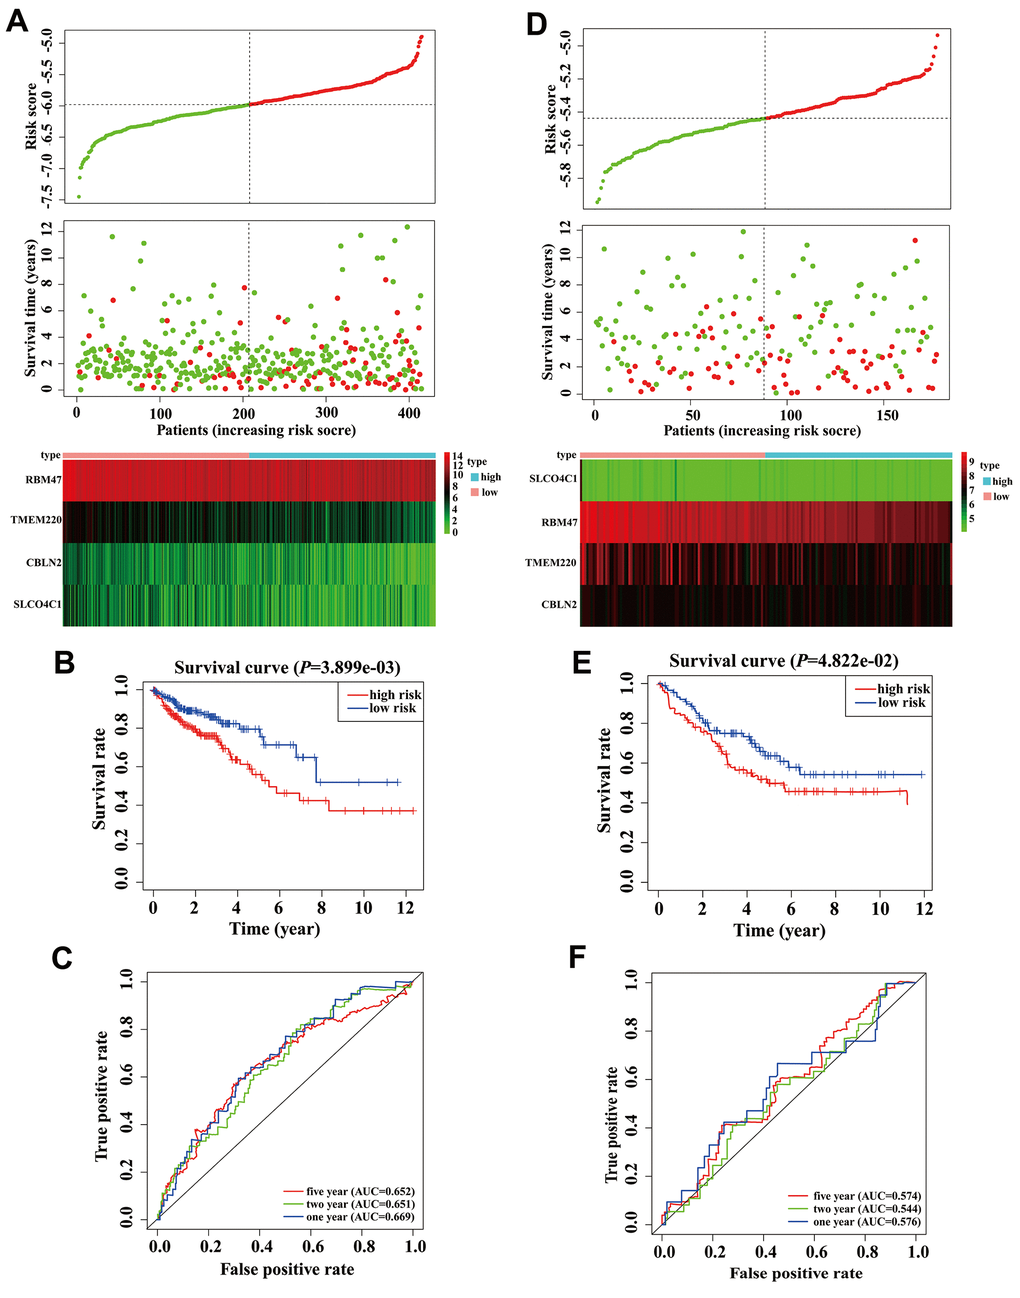 Validation and development of risk prediction model in colon adenocarcinoma (COAD) patients. (A) Risk score distribution in COAD patients, survival status of COAD patients, and expression heatmap of four methylation-driven genes (MDGs) in a Cancer Genome Atlas (TCGA) training cohort. (B) The K-M curve of overall survival (OS) for COAD patients between two different groups in our TCGA training cohort. (C) Time-dependent ROC curves at 1 year, 2 years, and 5 years in the TCGA training cohort. (D) Risk score distribution of COAD patients, survival status of COAD patients, and expression heatmap of four MDGs in a validation cohort. (E) The K-M curve of OS for COAD patients between two different groups in a validation cohort. (F) Time-dependent ROC curves at 1 year, 2 years, and 5 years in a validation cohort.